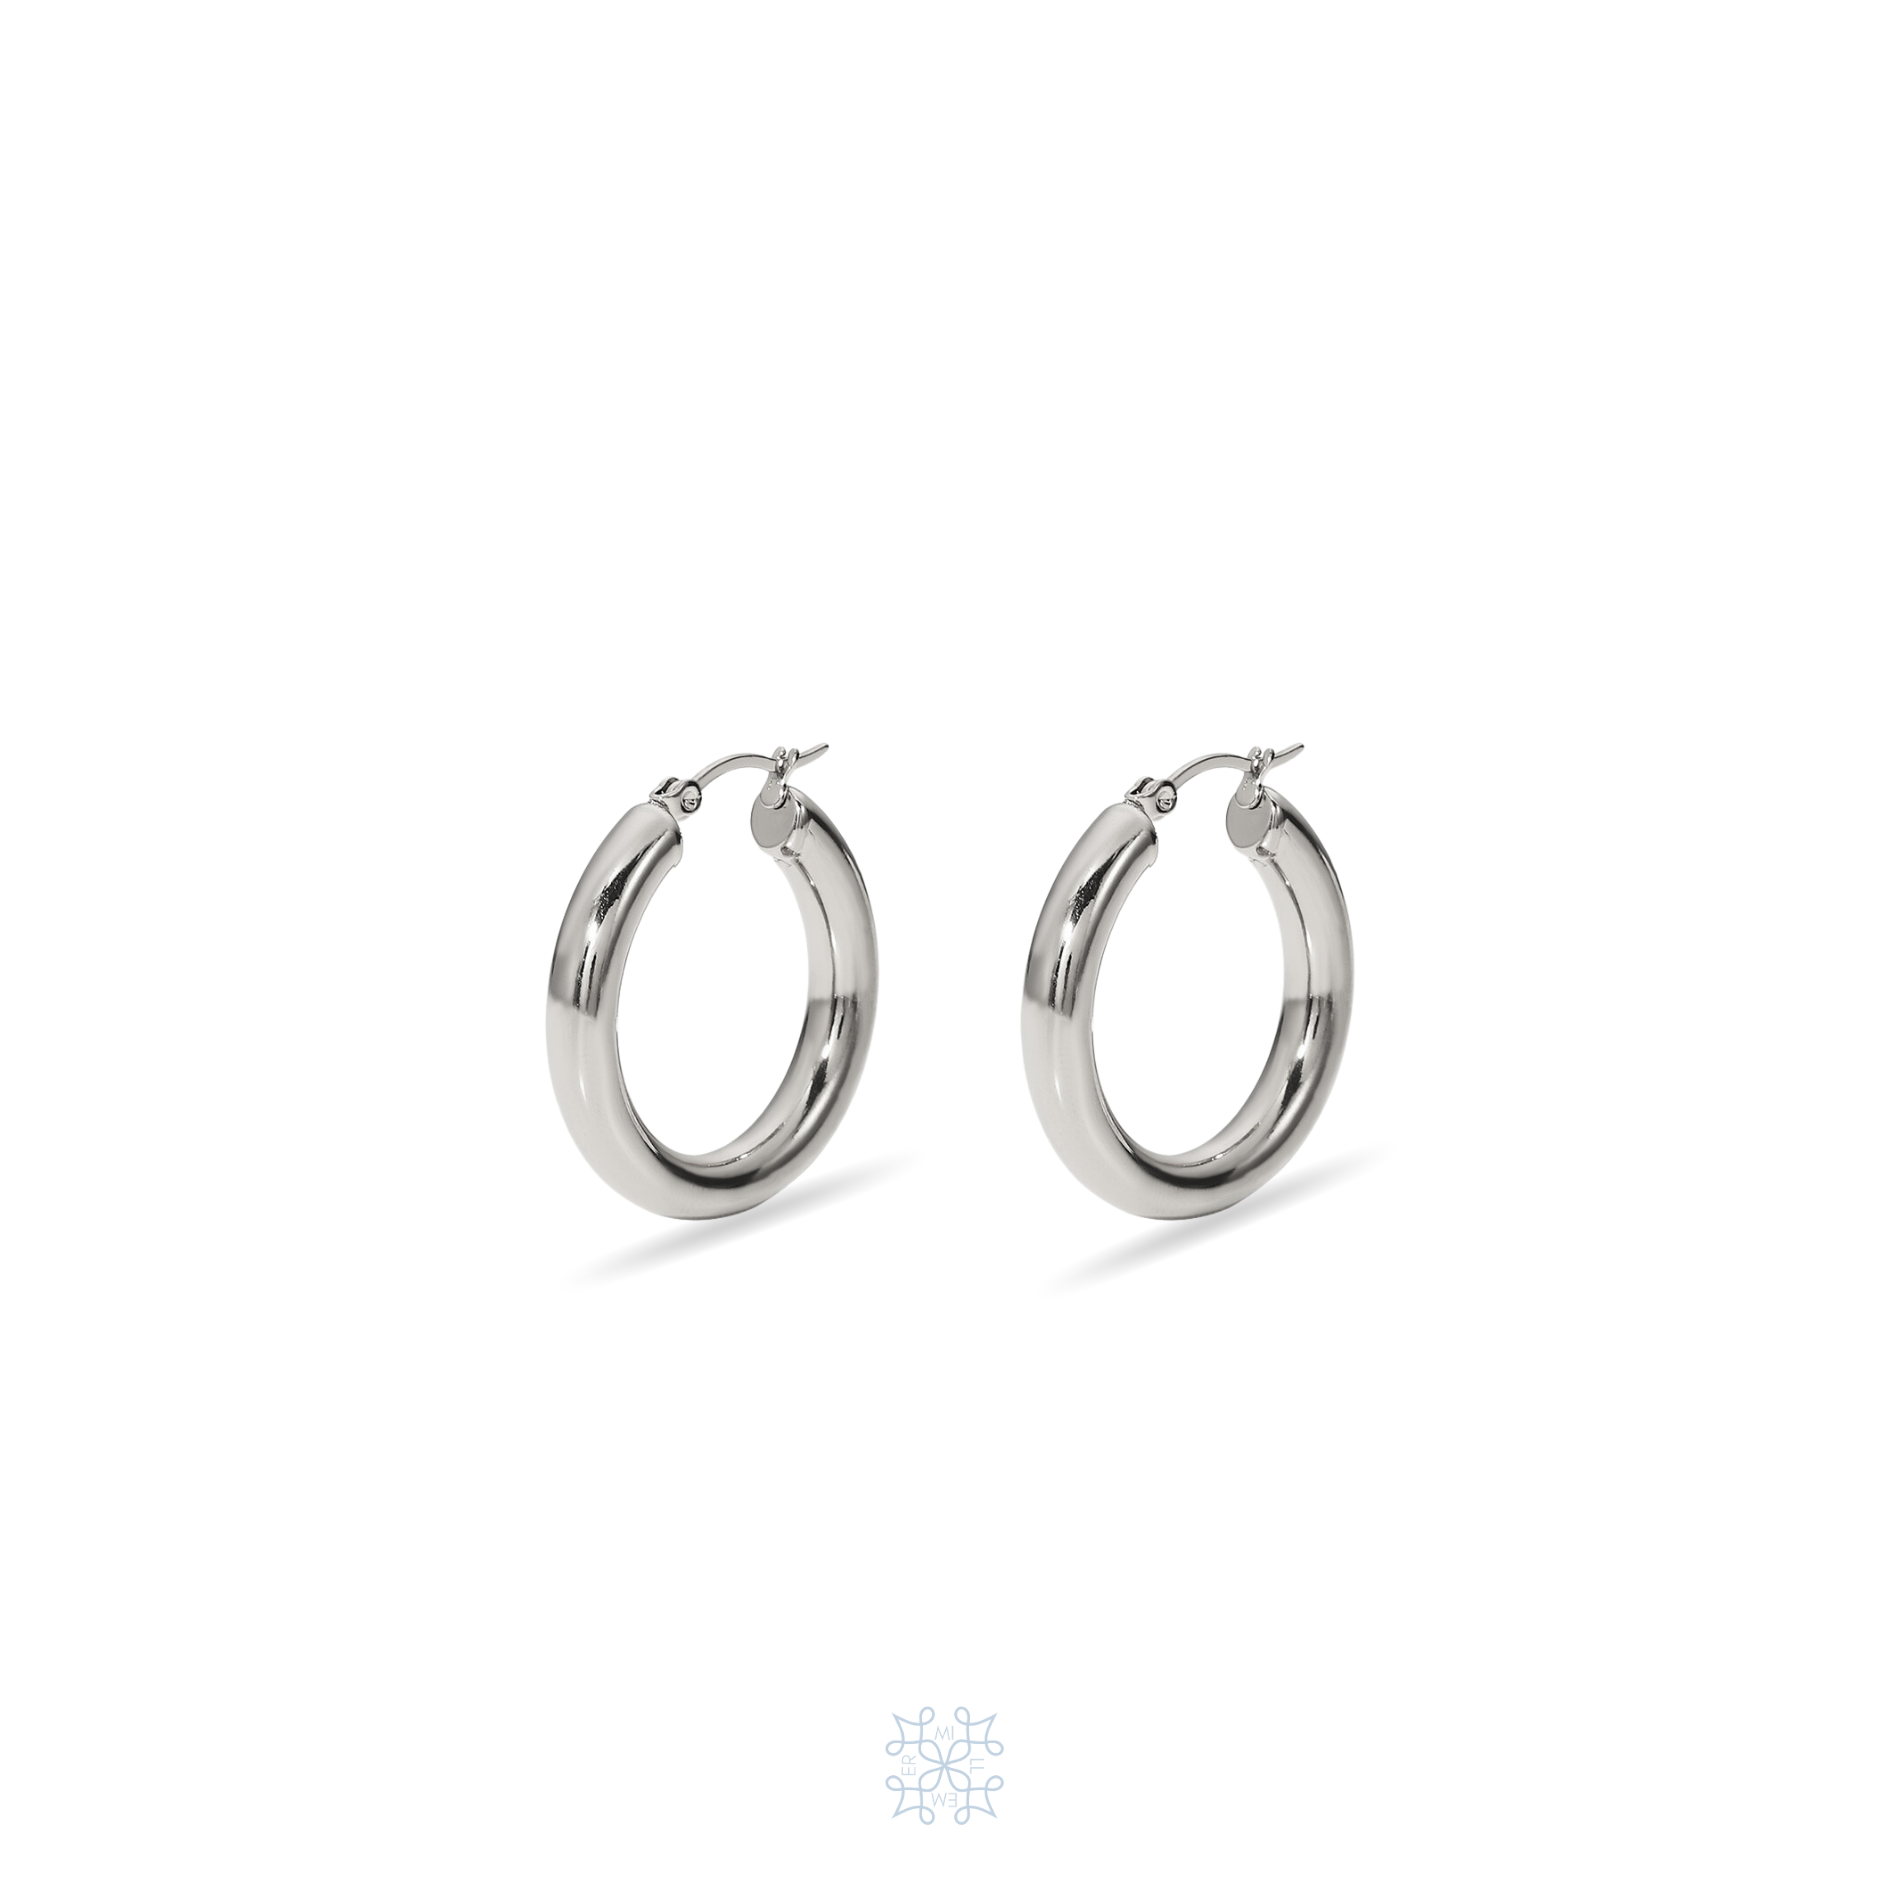 Classic silver plated hoop earrings. Round circle earrings with a silver plating.